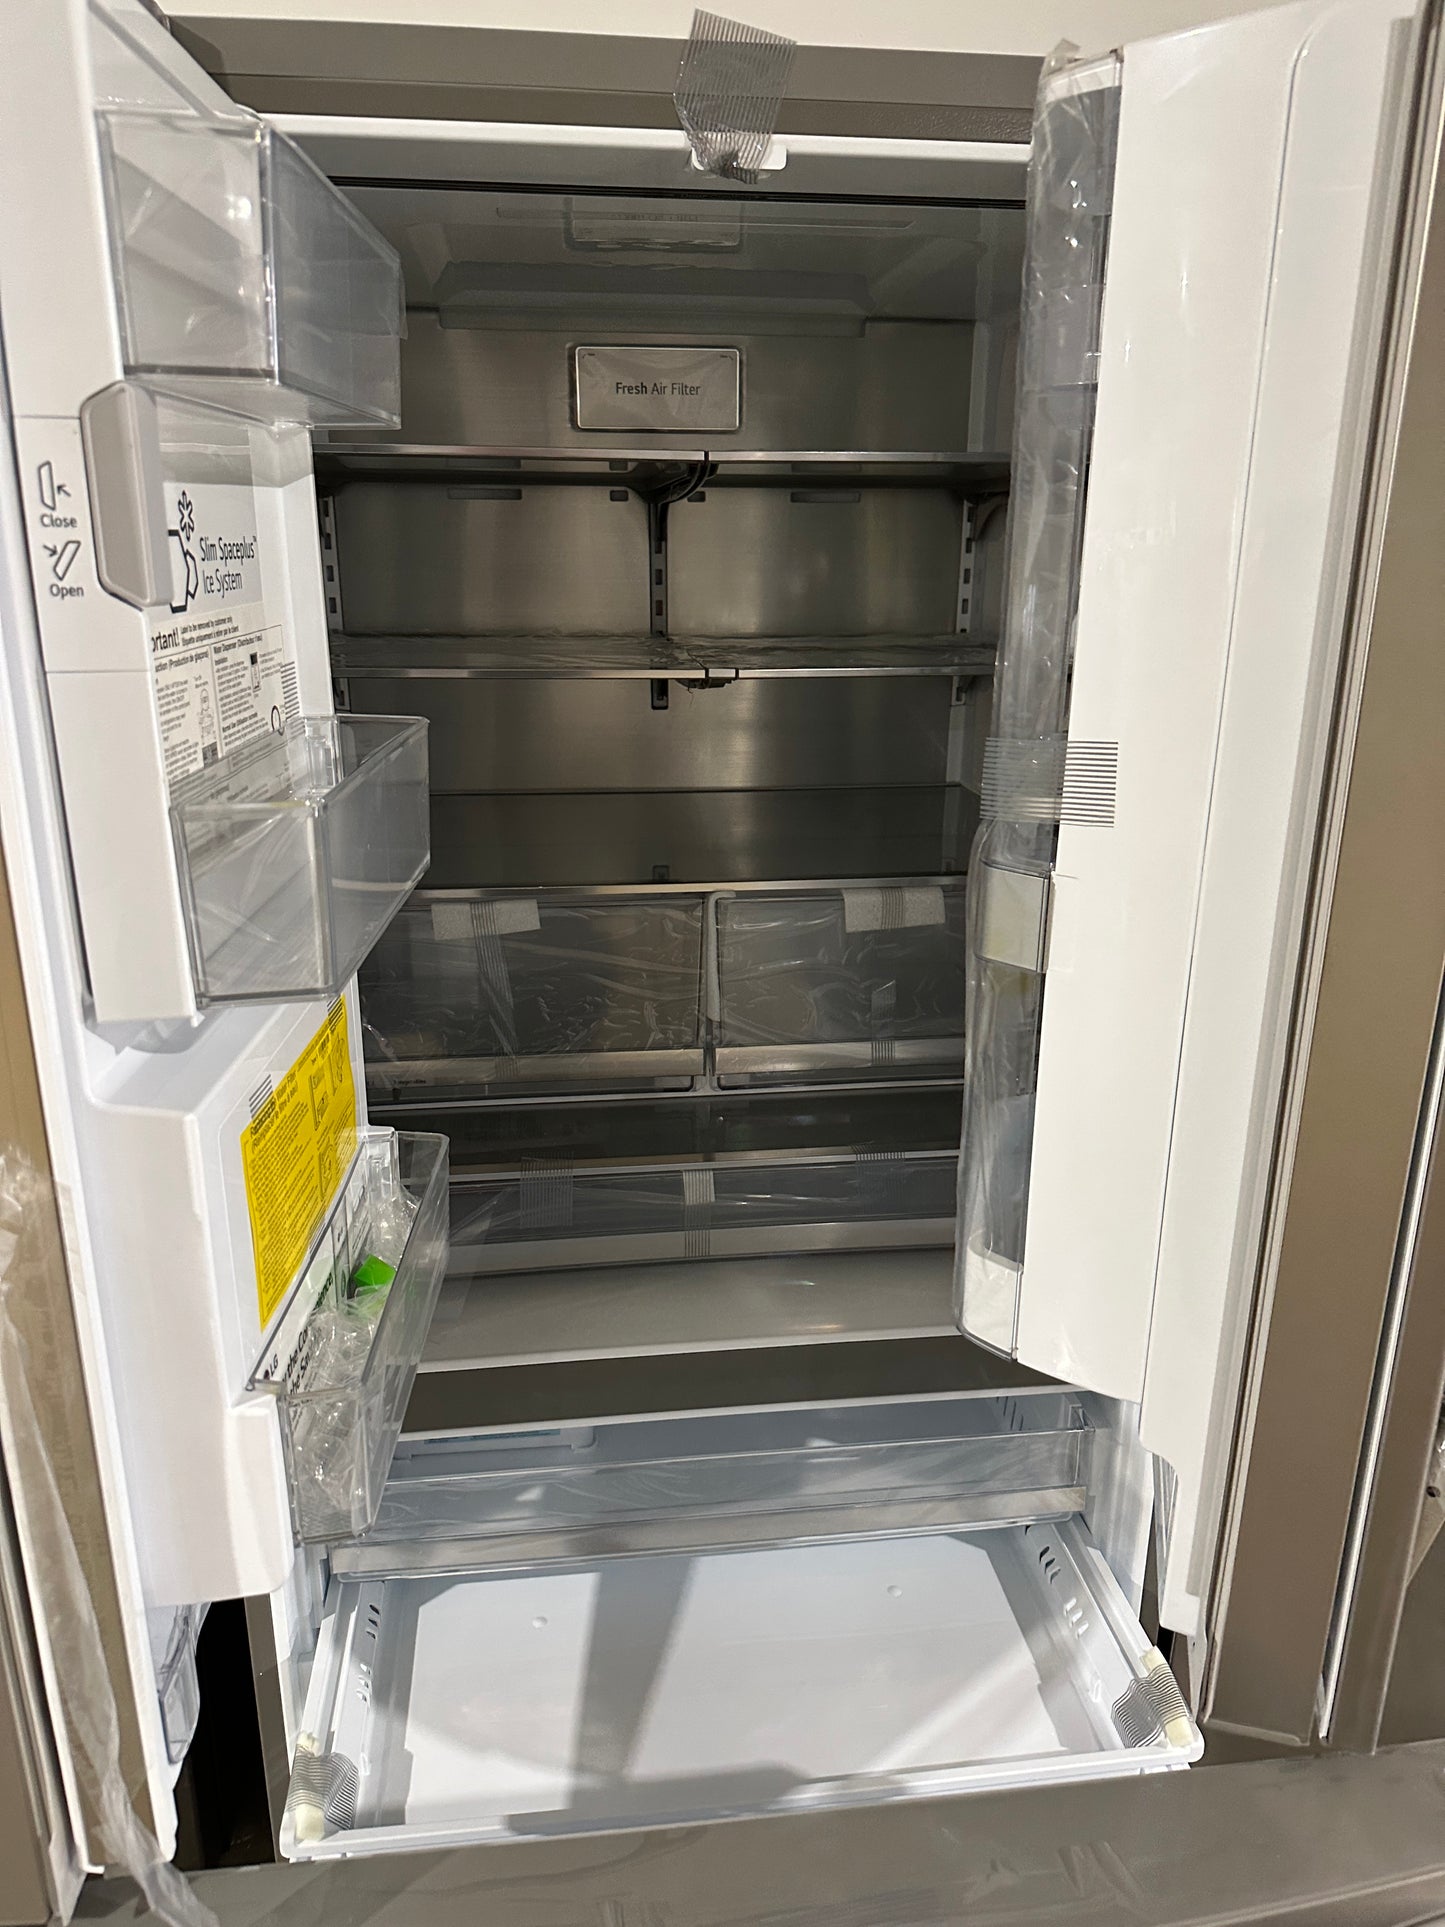 GREAT NEW LG REFRIGERATOR with CRAFT ICE - REF11401S LRFDS3016S